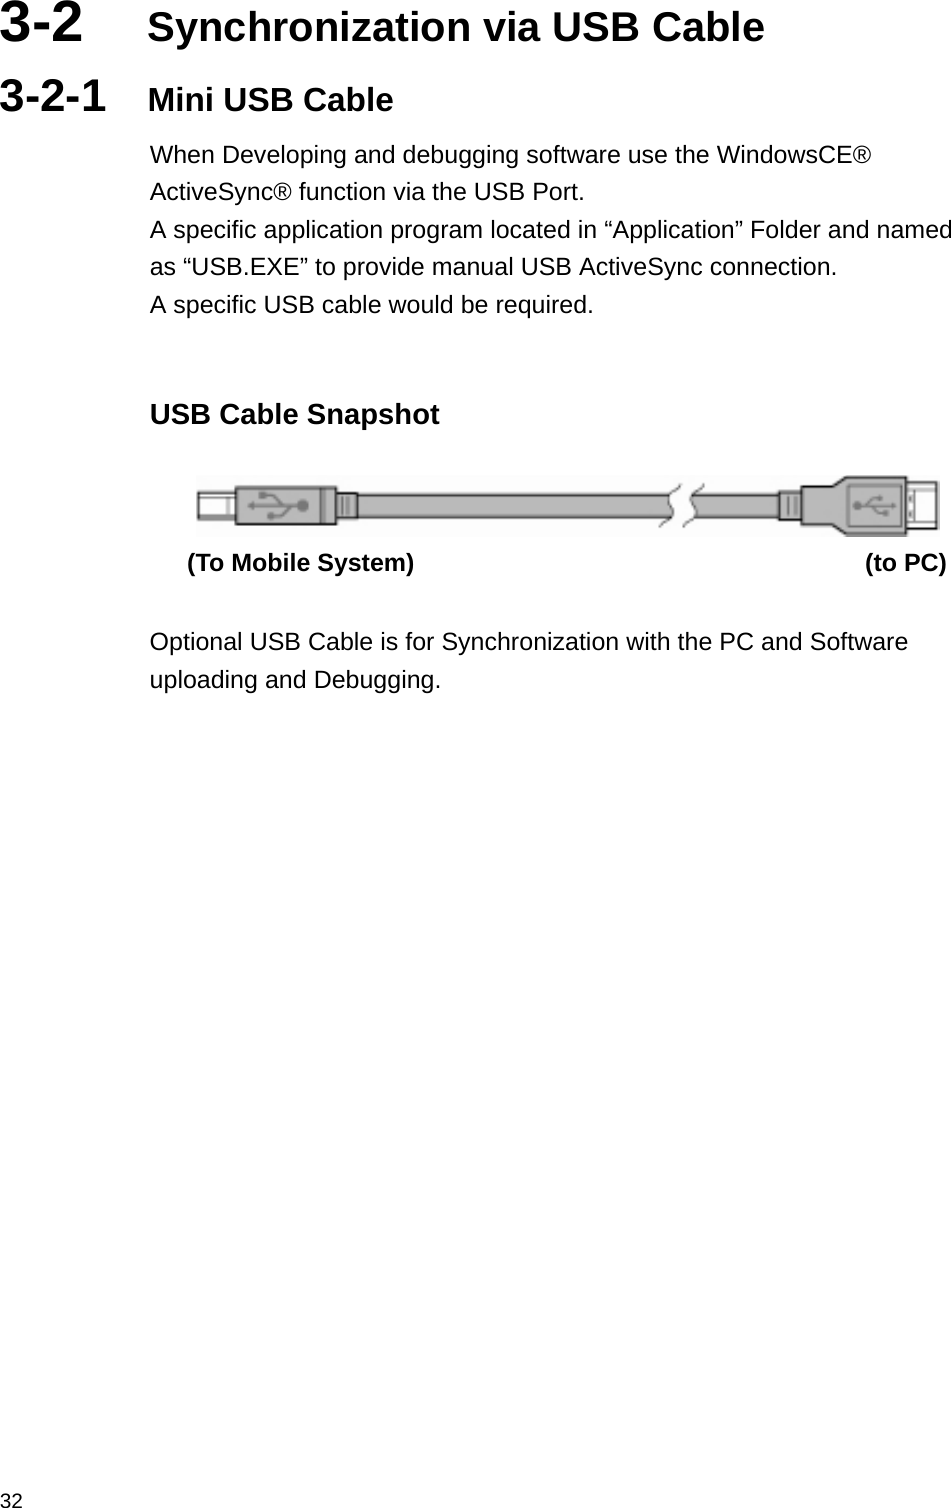  323-2  Synchronization via USB Cable 3-2-1  Mini USB Cable When Developing and debugging software use the WindowsCE® ActiveSync® function via the USB Port. A specific application program located in “Application” Folder and named as “USB.EXE” to provide manual USB ActiveSync connection. A specific USB cable would be required.  USB Cable Snapshot    (To Mobile System)                                    (to PC)  Optional USB Cable is for Synchronization with the PC and Software uploading and Debugging.  